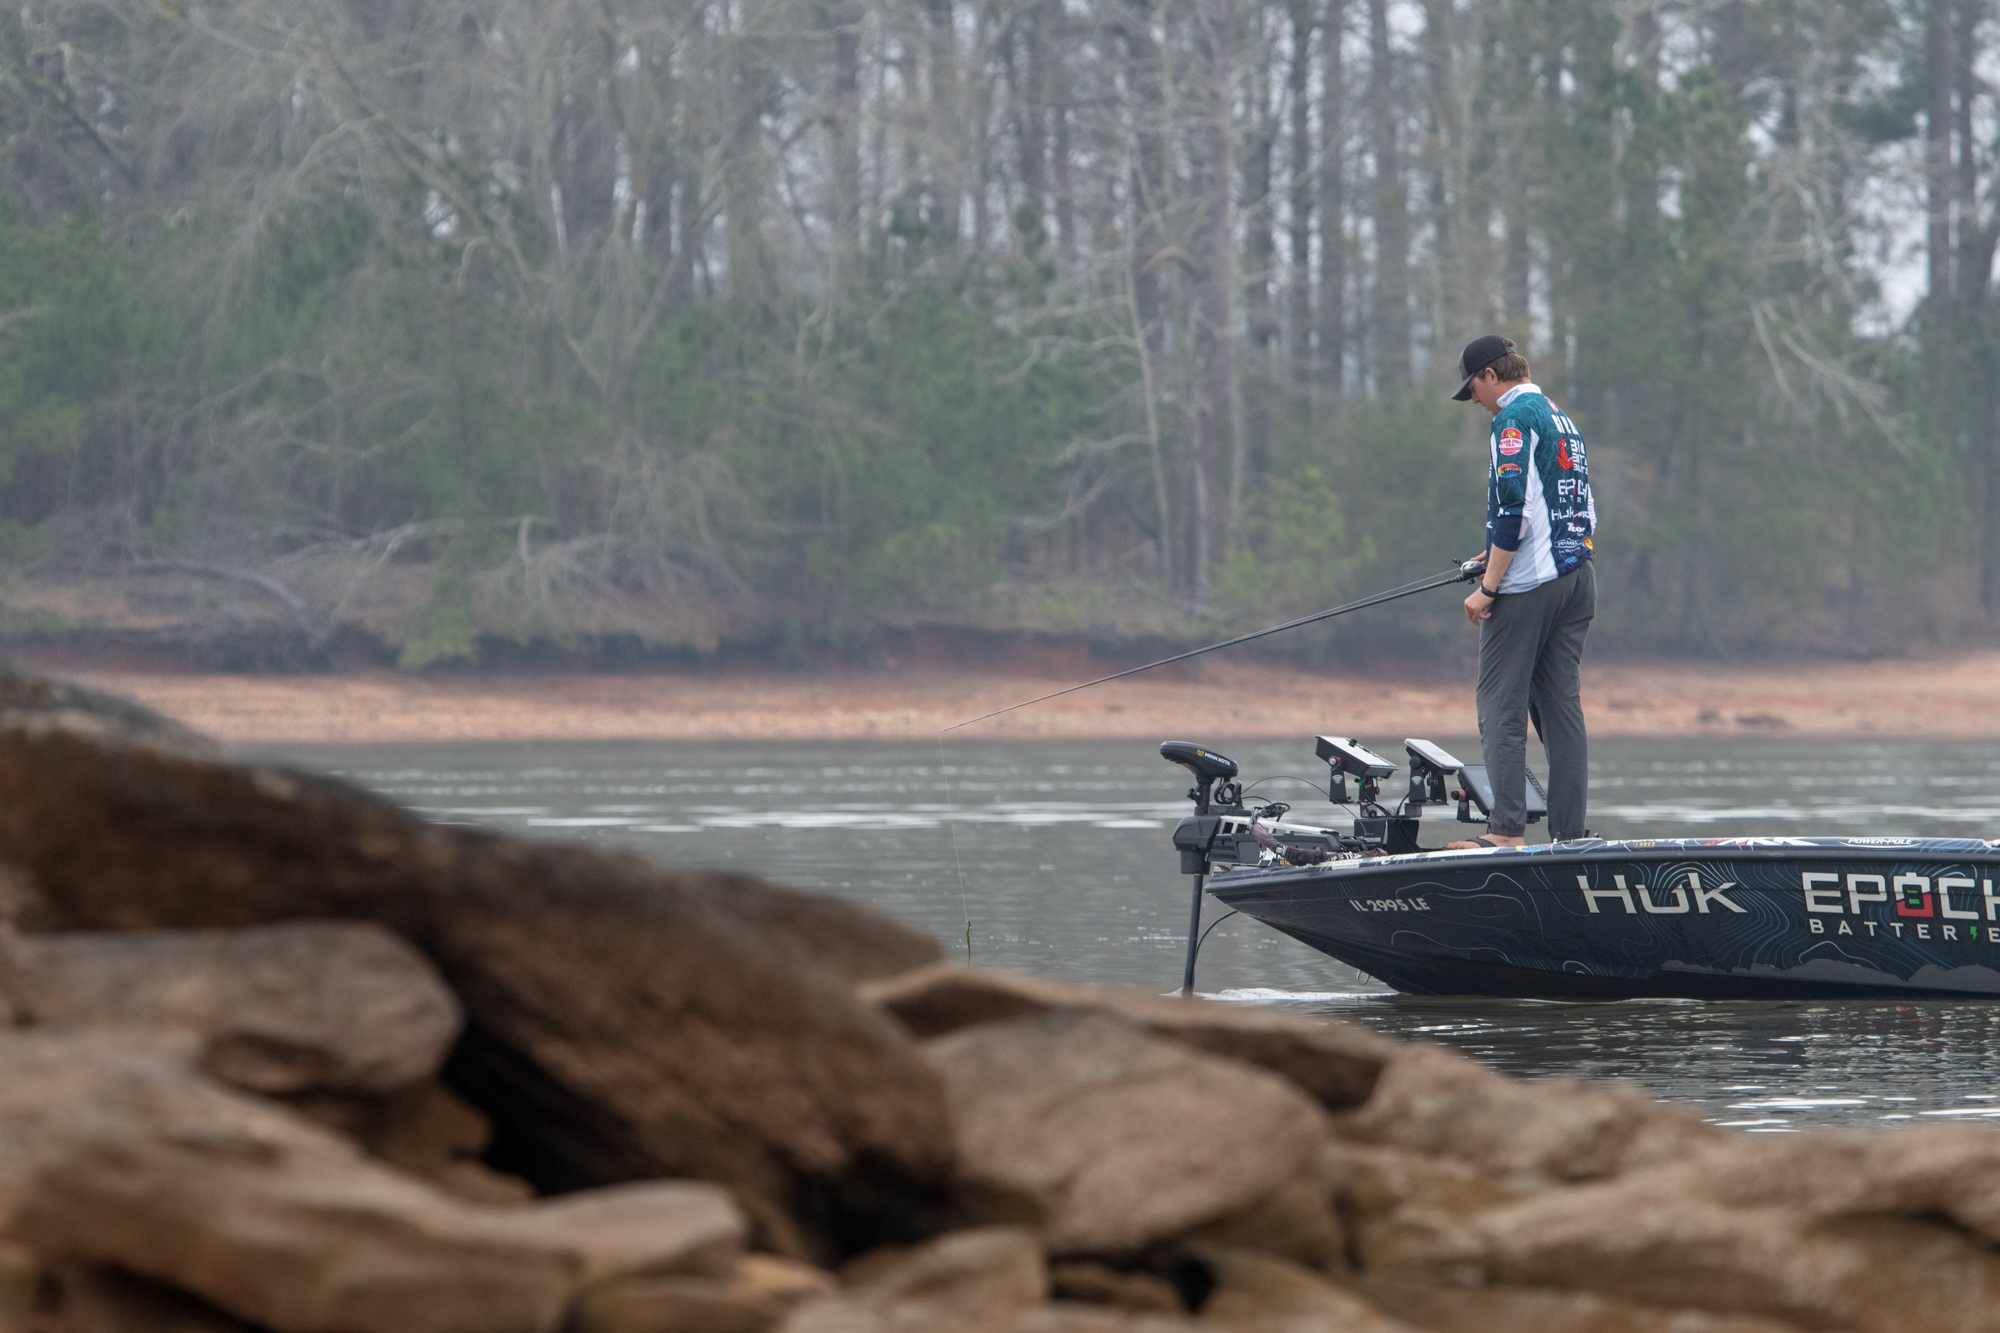 Z-Man appoints new distribution group - Major League Fishing